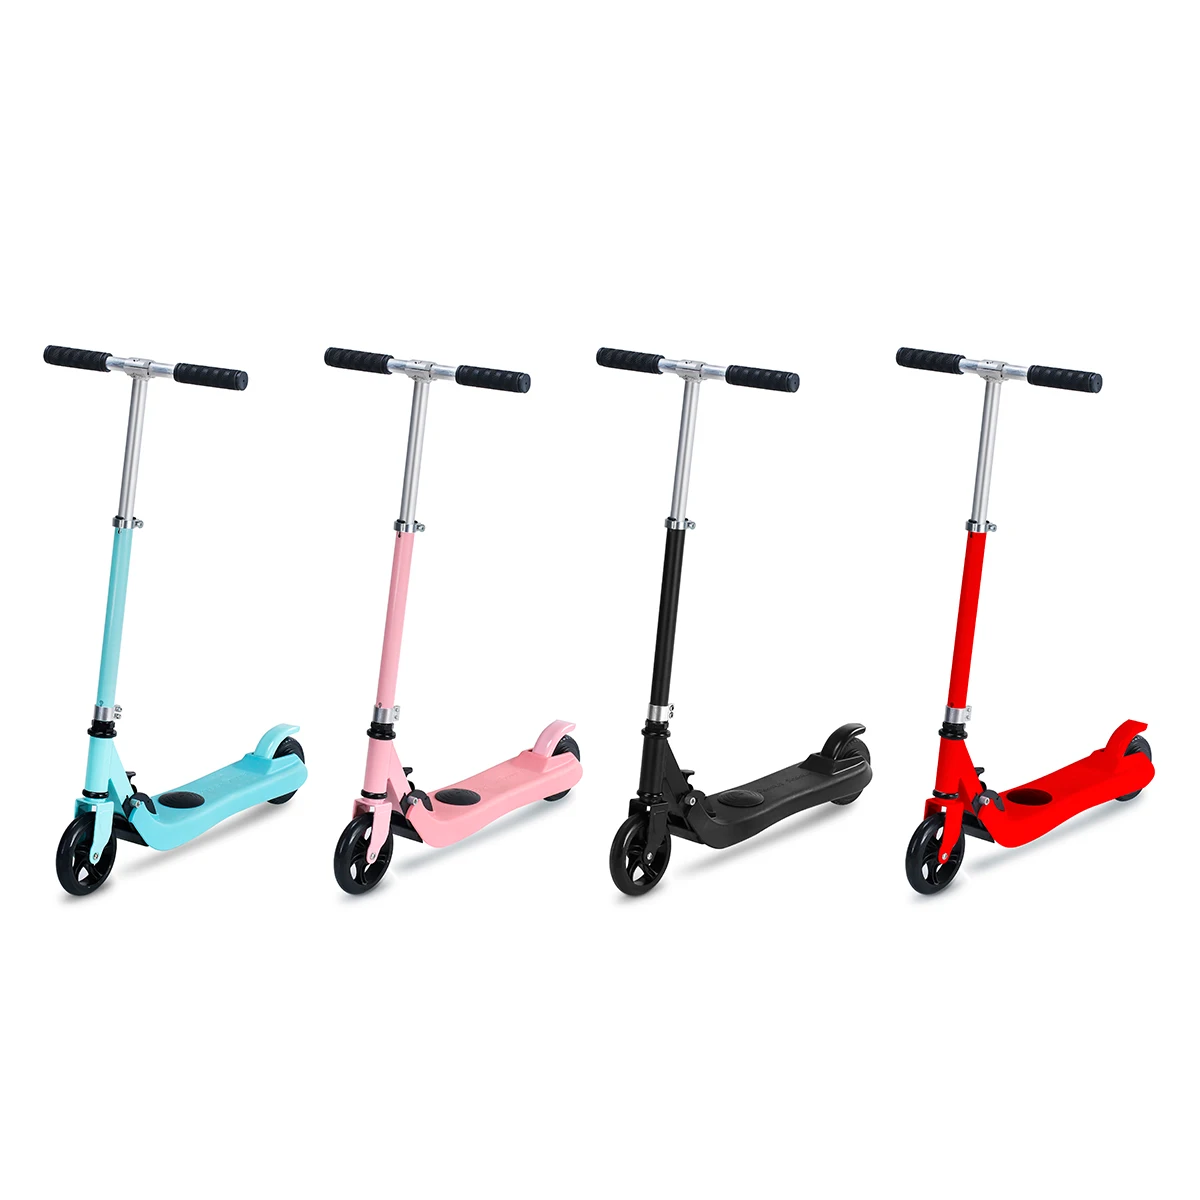 

2021 Wholesale Factory Cheap Price Adjustable Foldable Portable Electric Scooter for Kids Two Wheels Chinese manufacturers price, Black, blue, pink